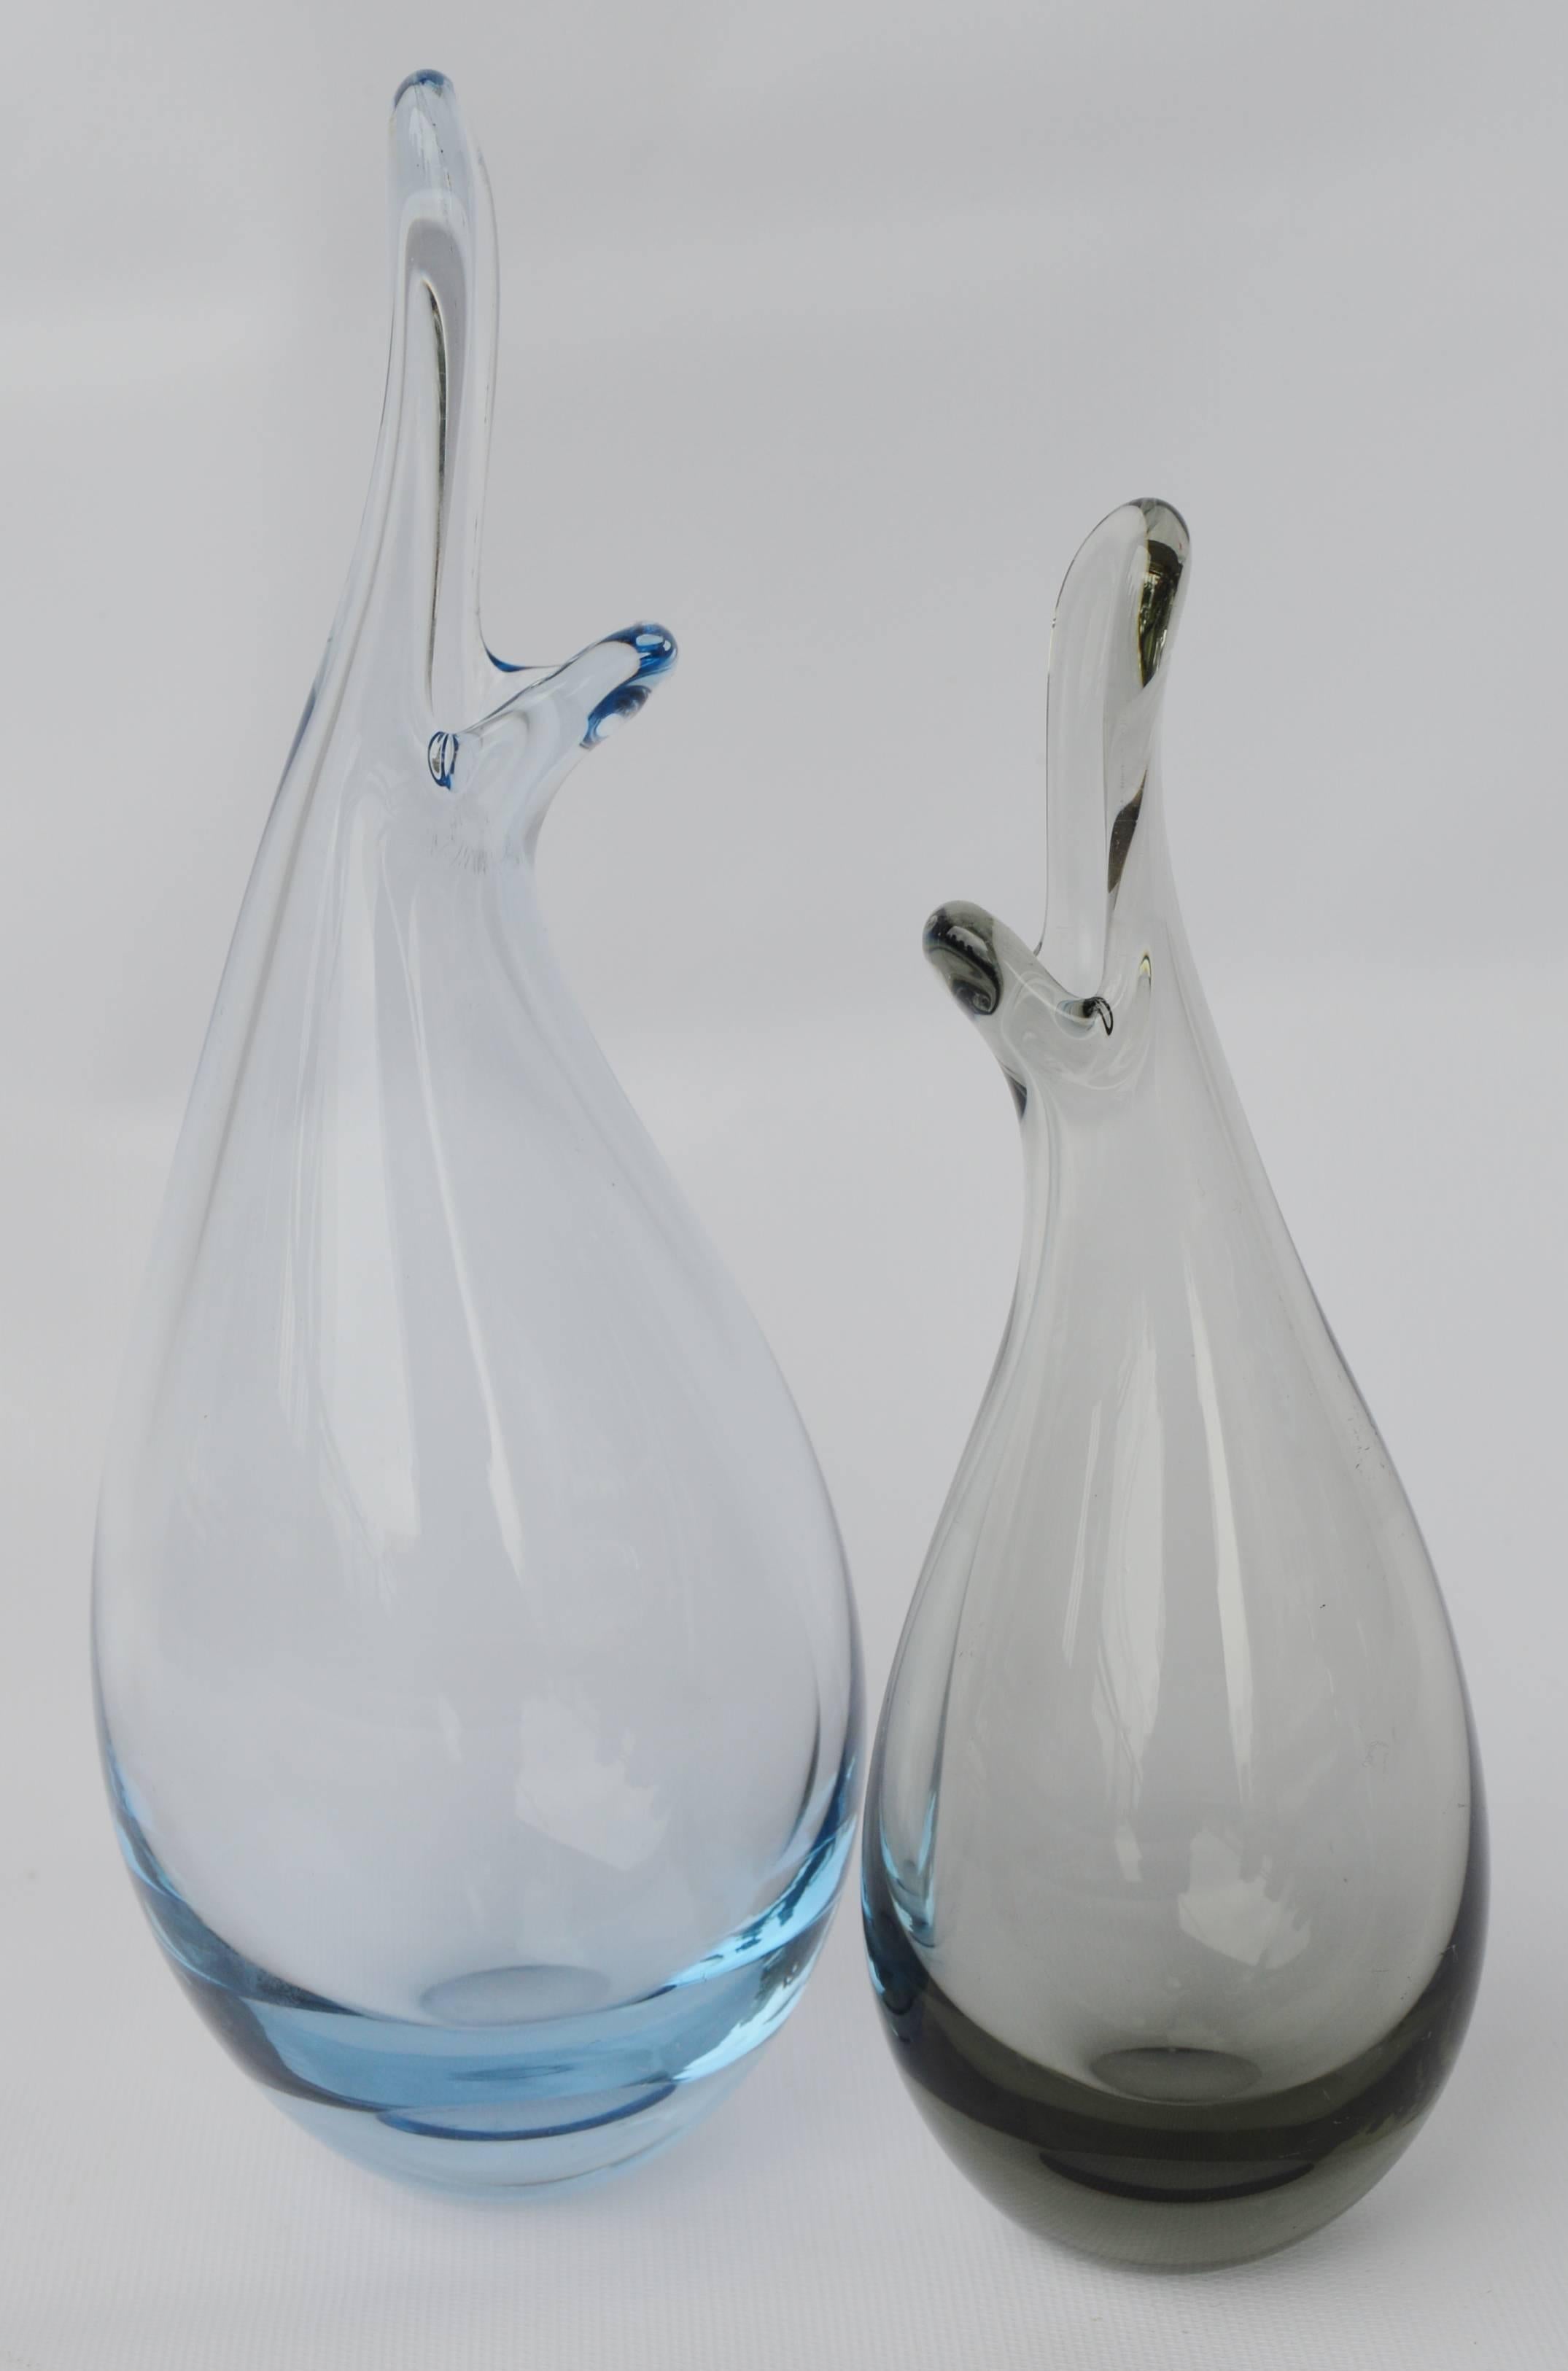 This delightful pair of handblown art glass duckling vases have so much character! Made by Per Lutkin for Holmegaard (signed), the larger is in a pale blue, the smaller one is smoked. In fabulous condition generally - with no chips or flea bites,